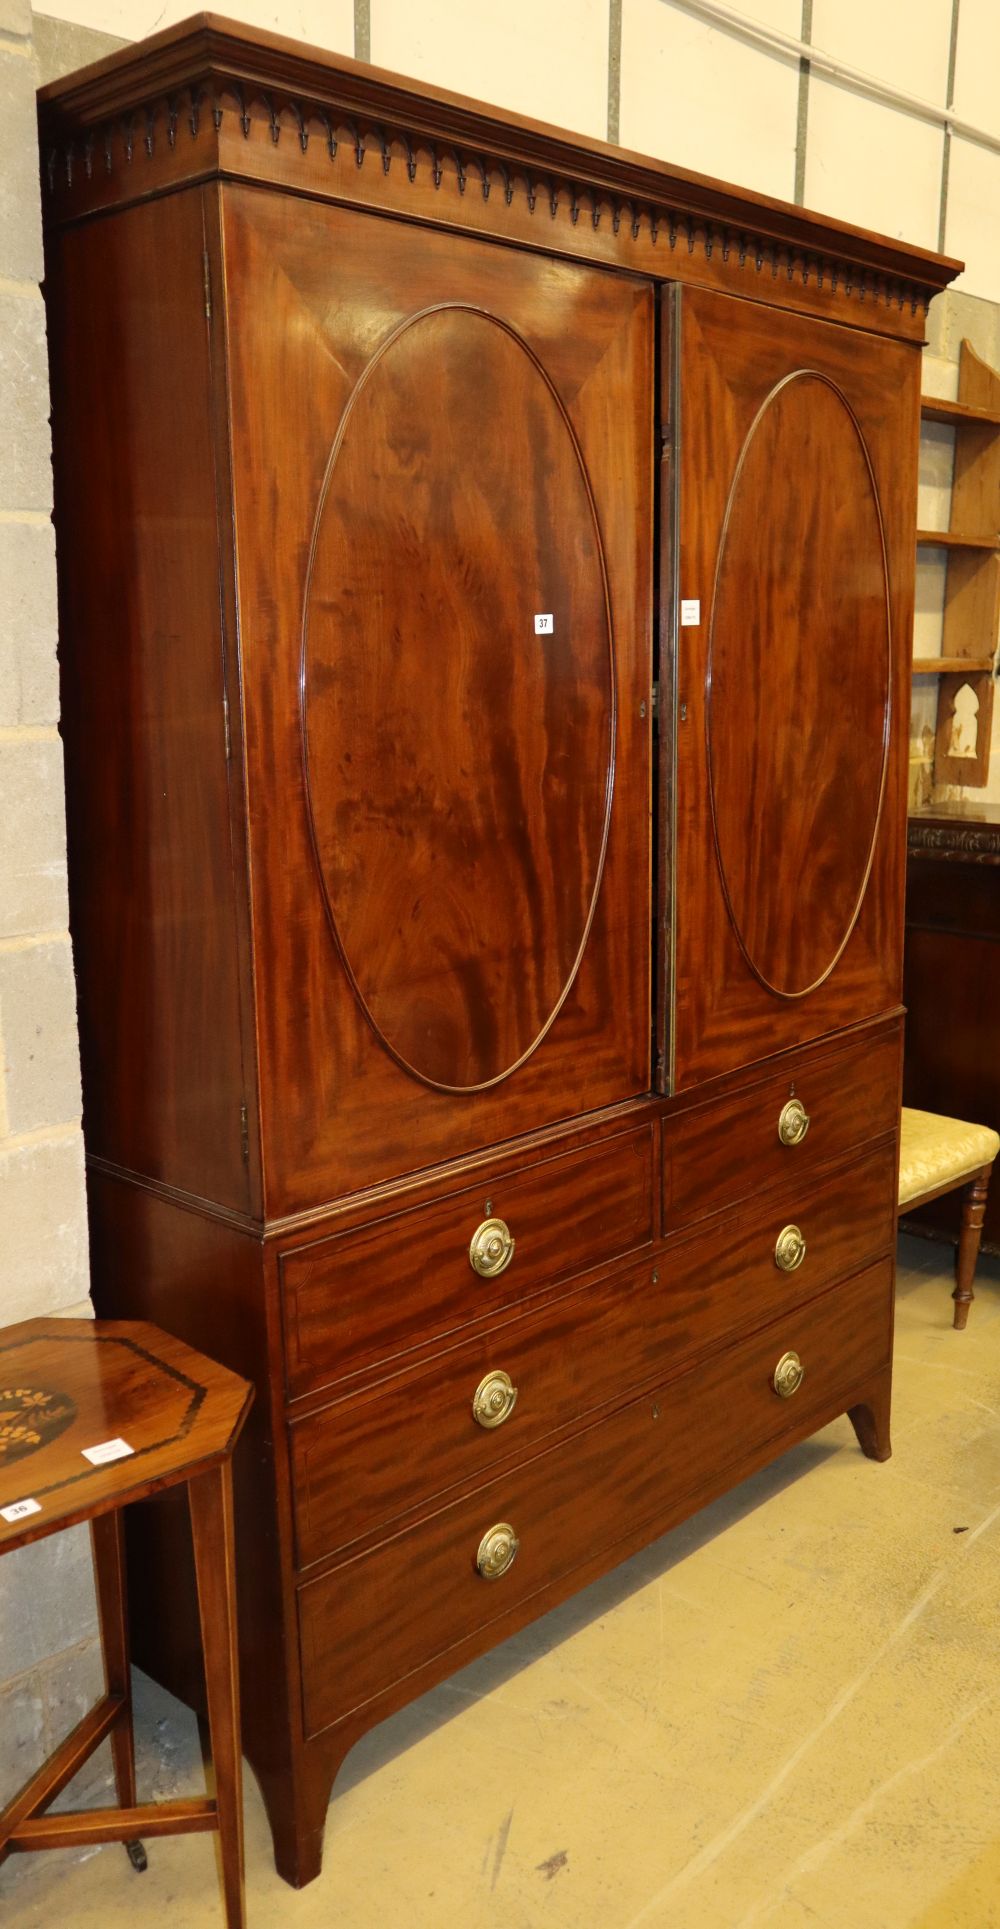 A Regency mahogany linen press, fitted oval panelled doors now enclosing hanging space to the left